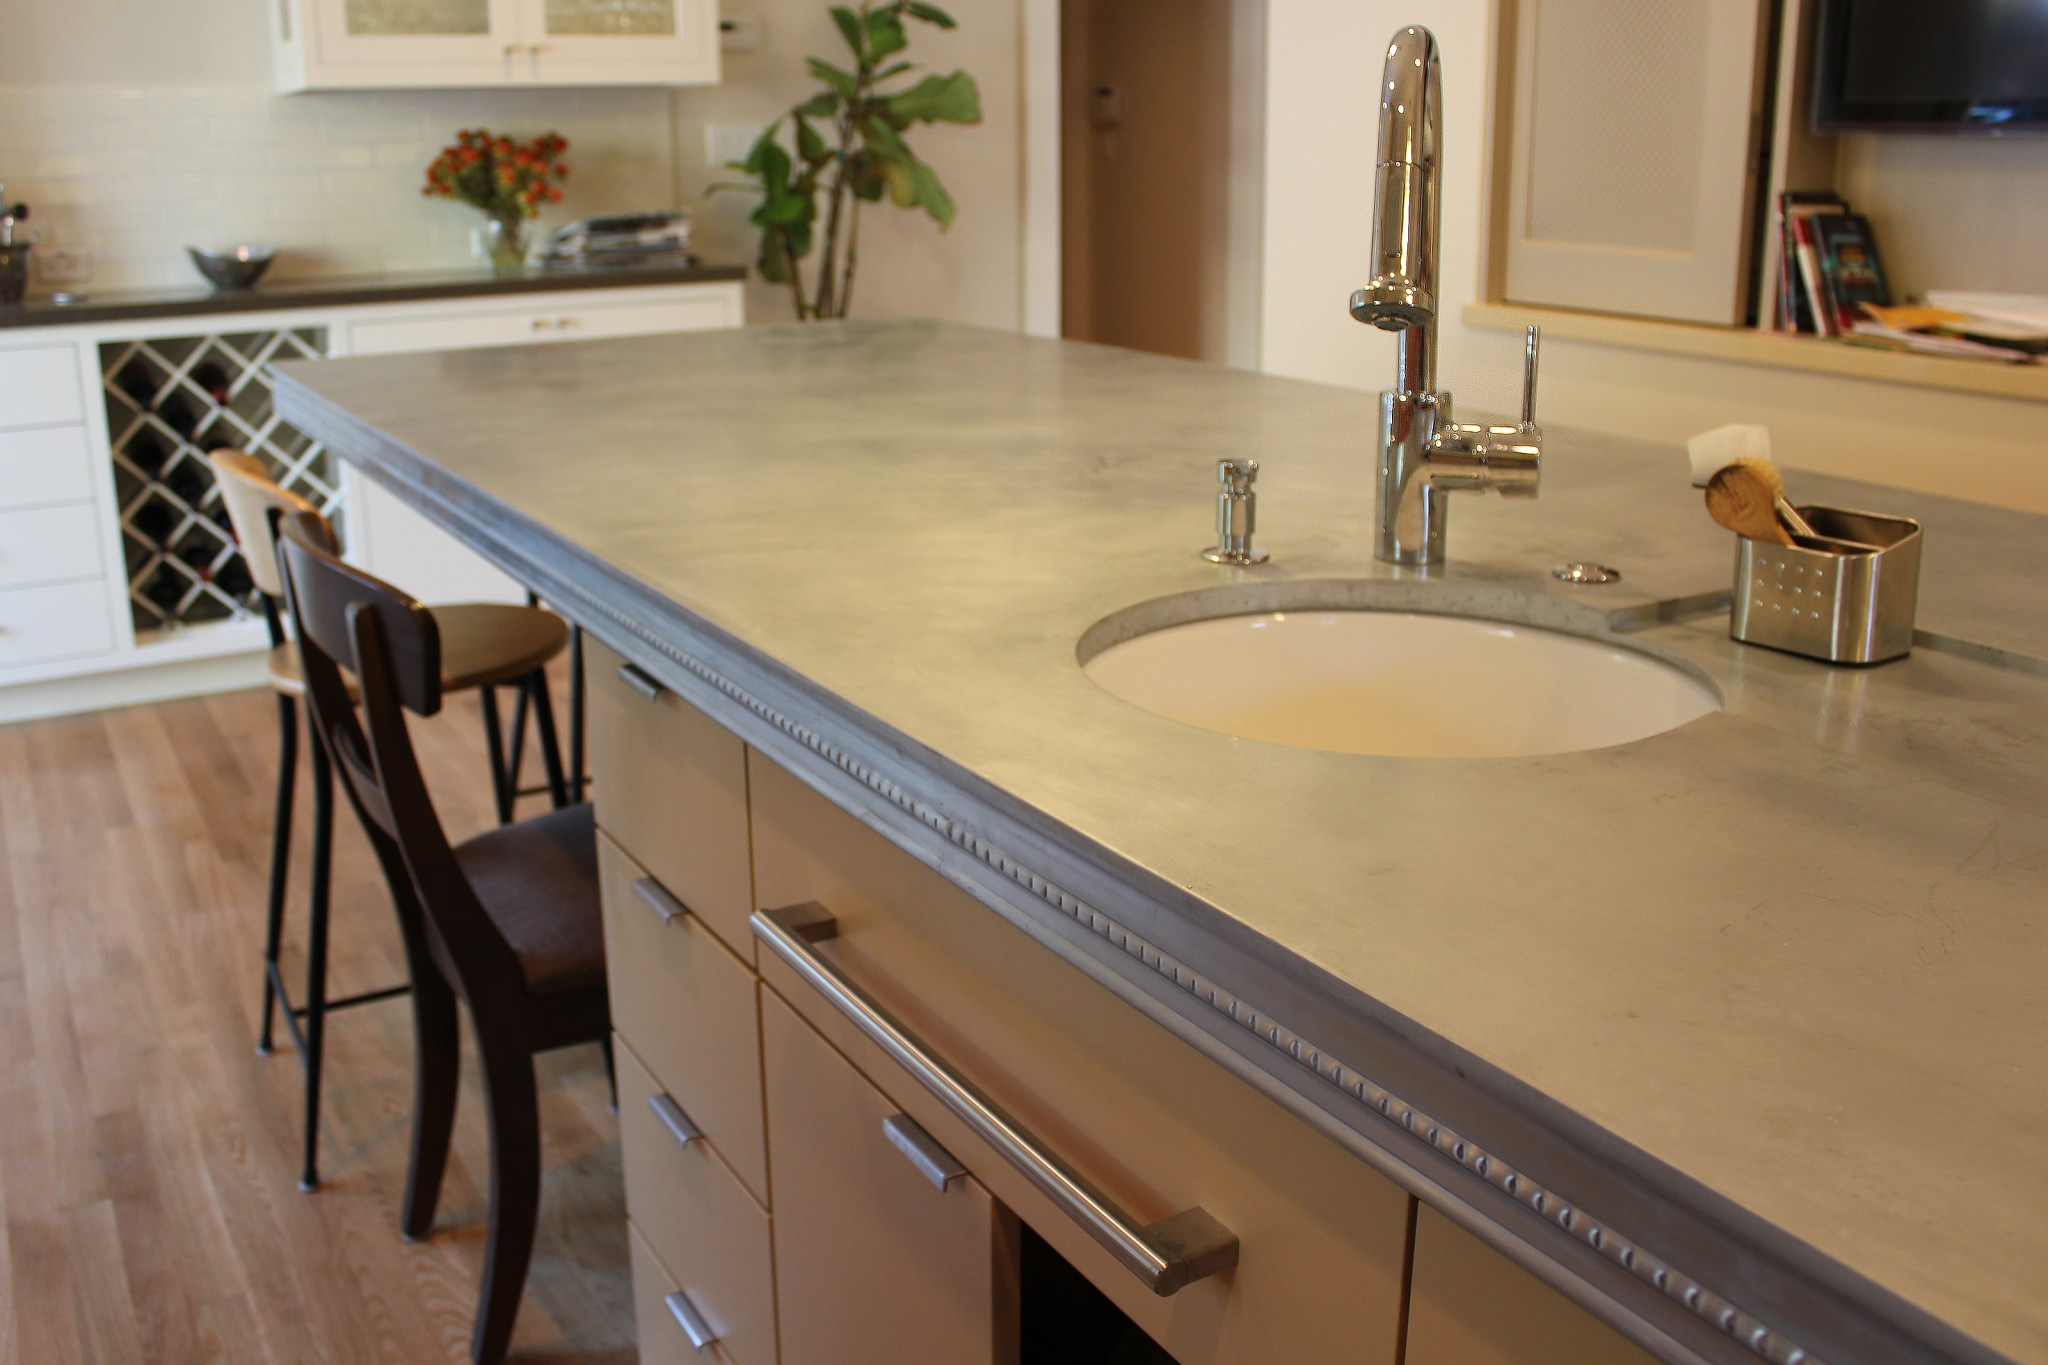 Zinc countertop in a kitchen with a fancy edge